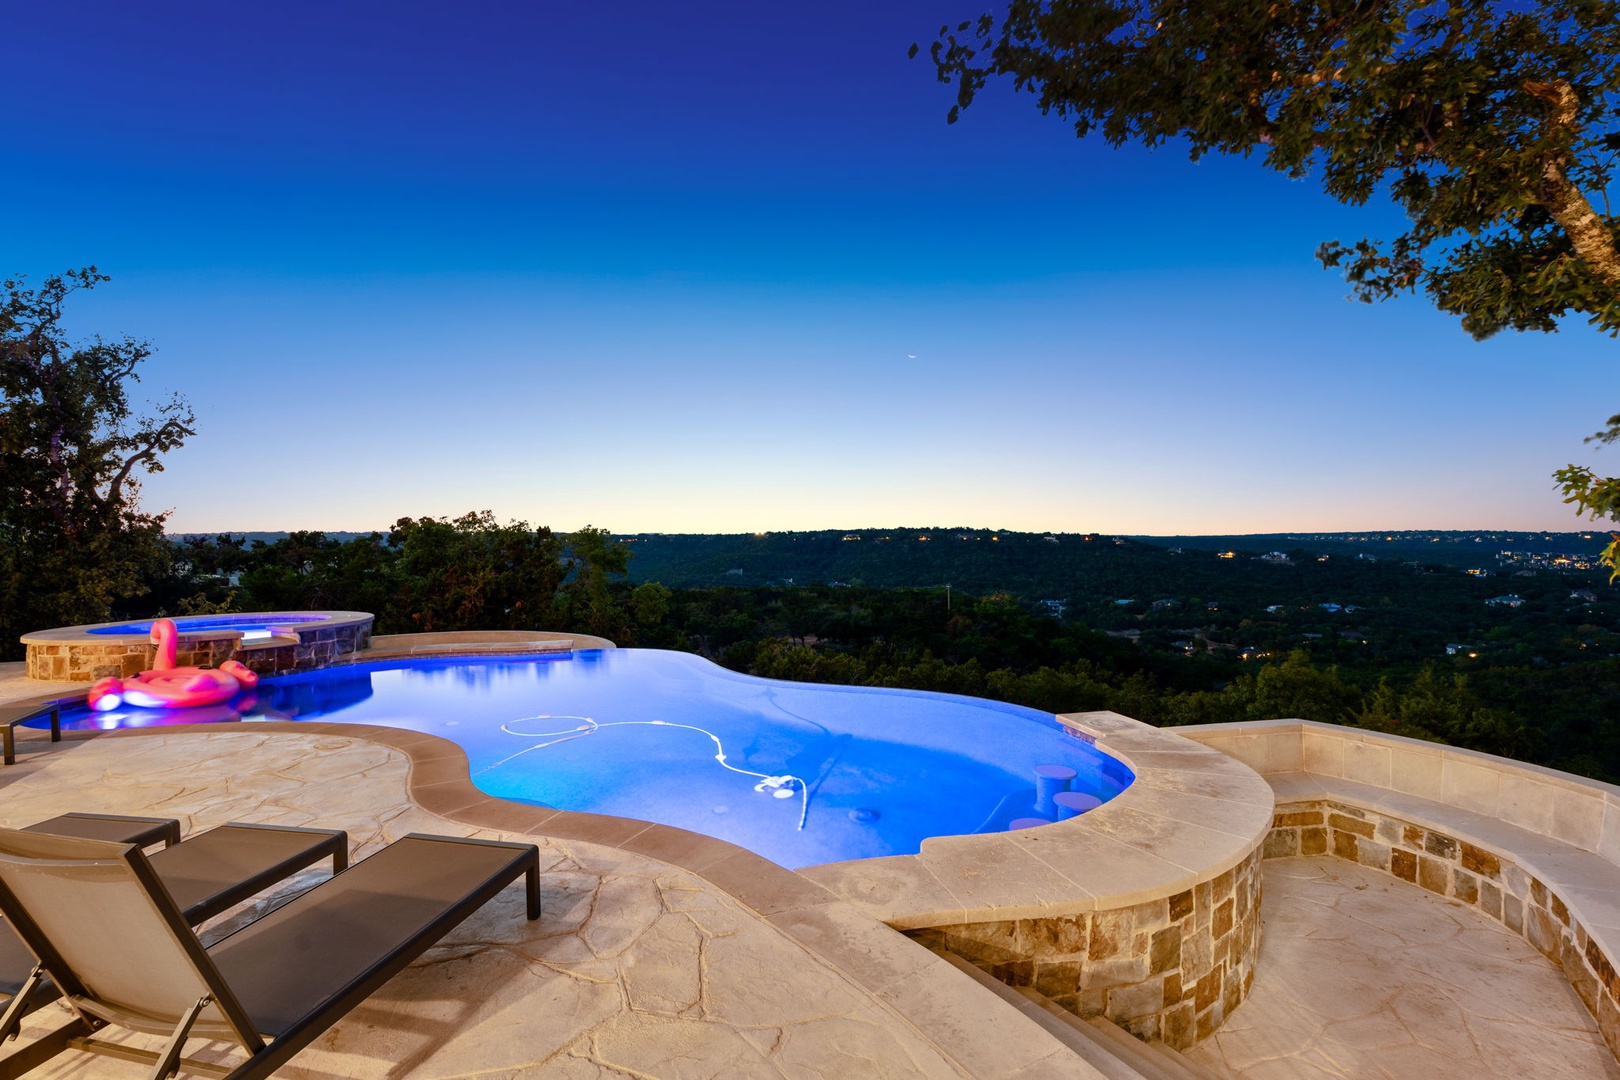 Spend your evenings lounging by the pool or making a splash with a view